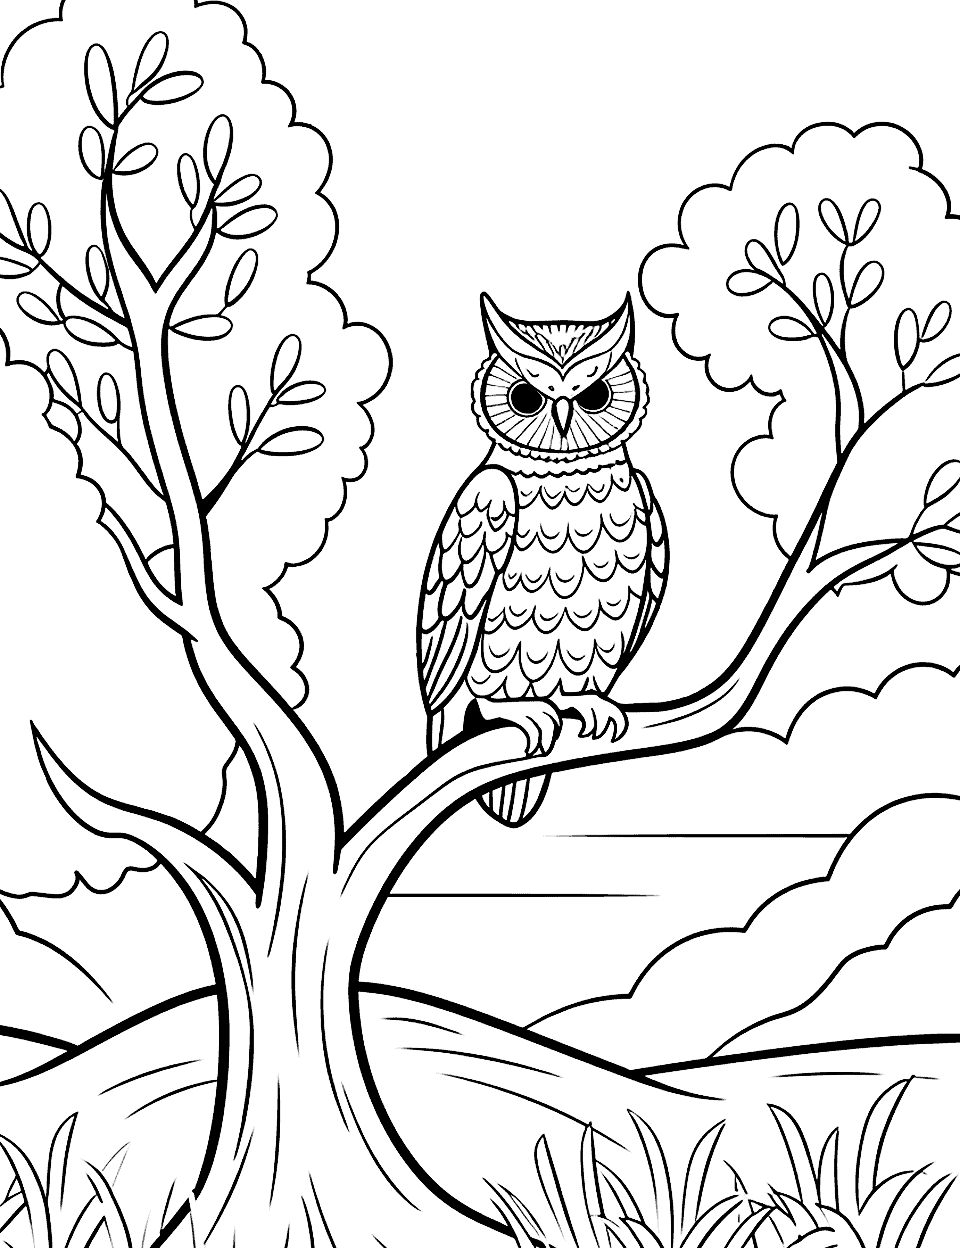 Owl Perched in a Tree at Night Coloring Page - An owl sitting in the branch of a tree at night.